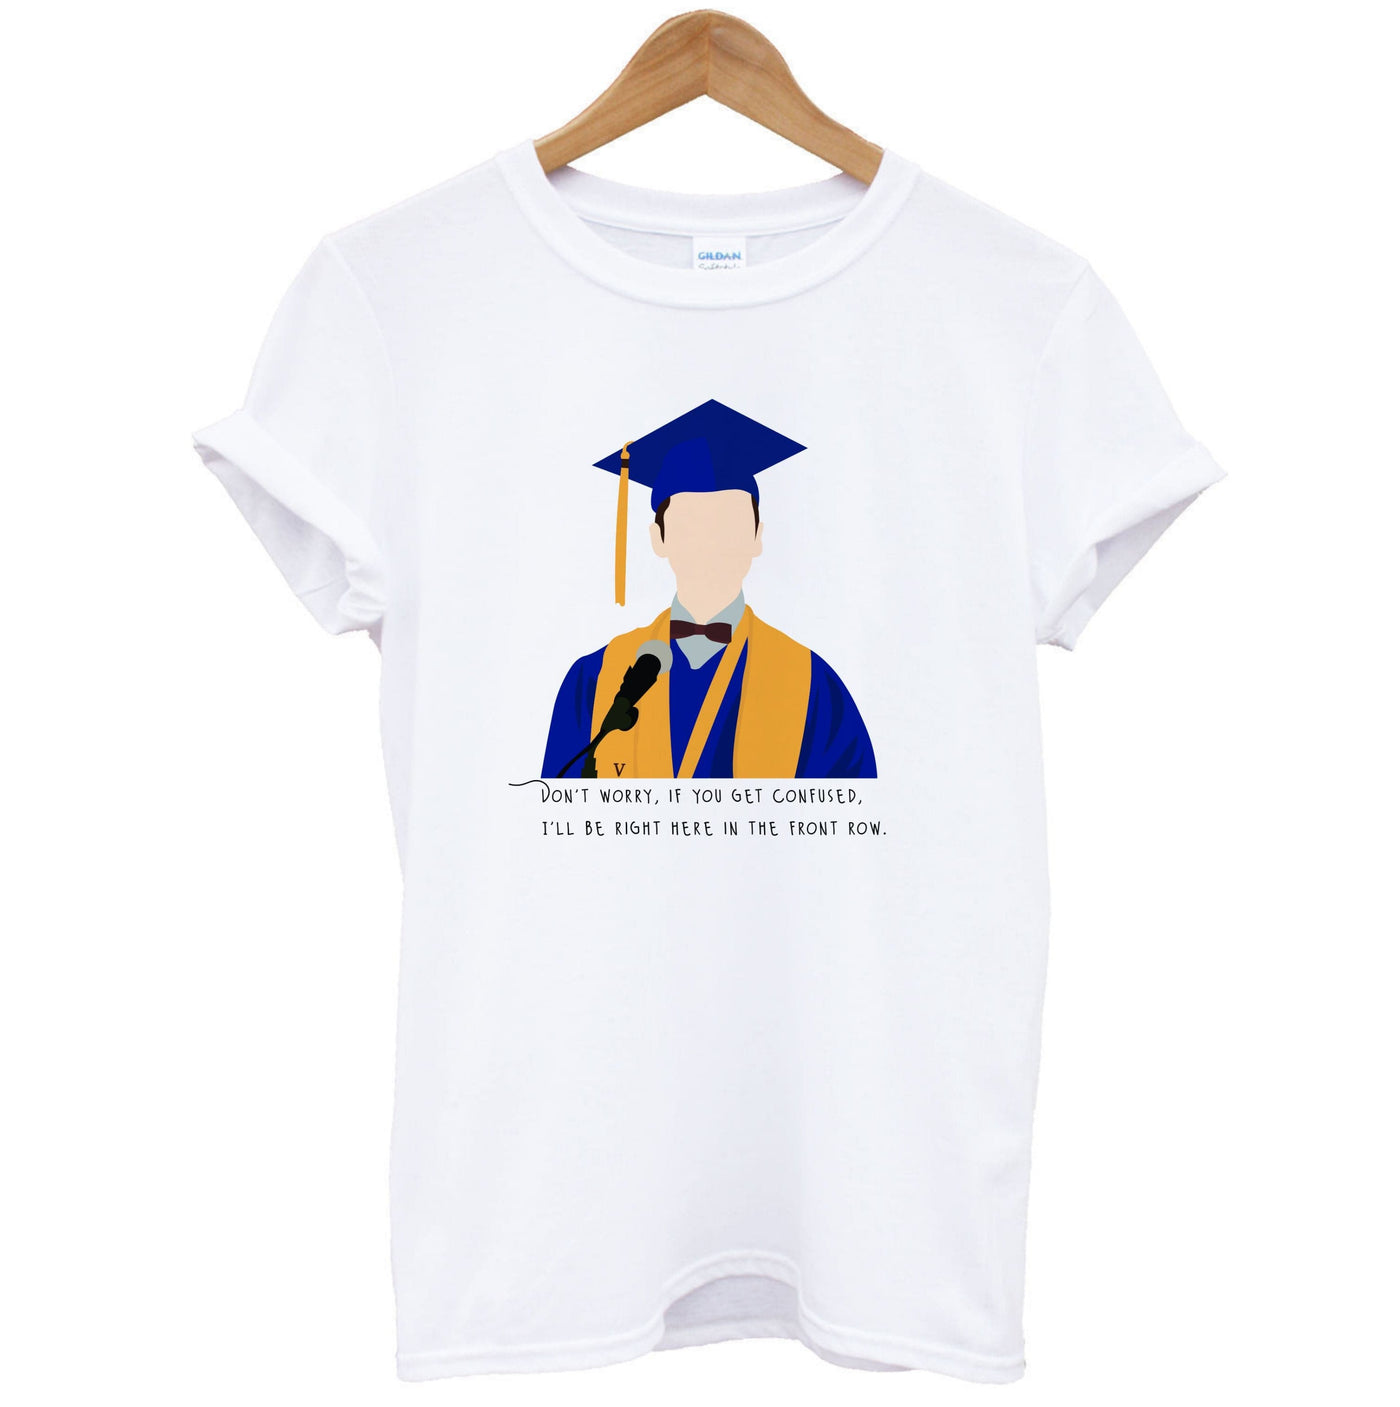 I'll Be Right Here In The Front Row - Young Sheldon T-Shirt